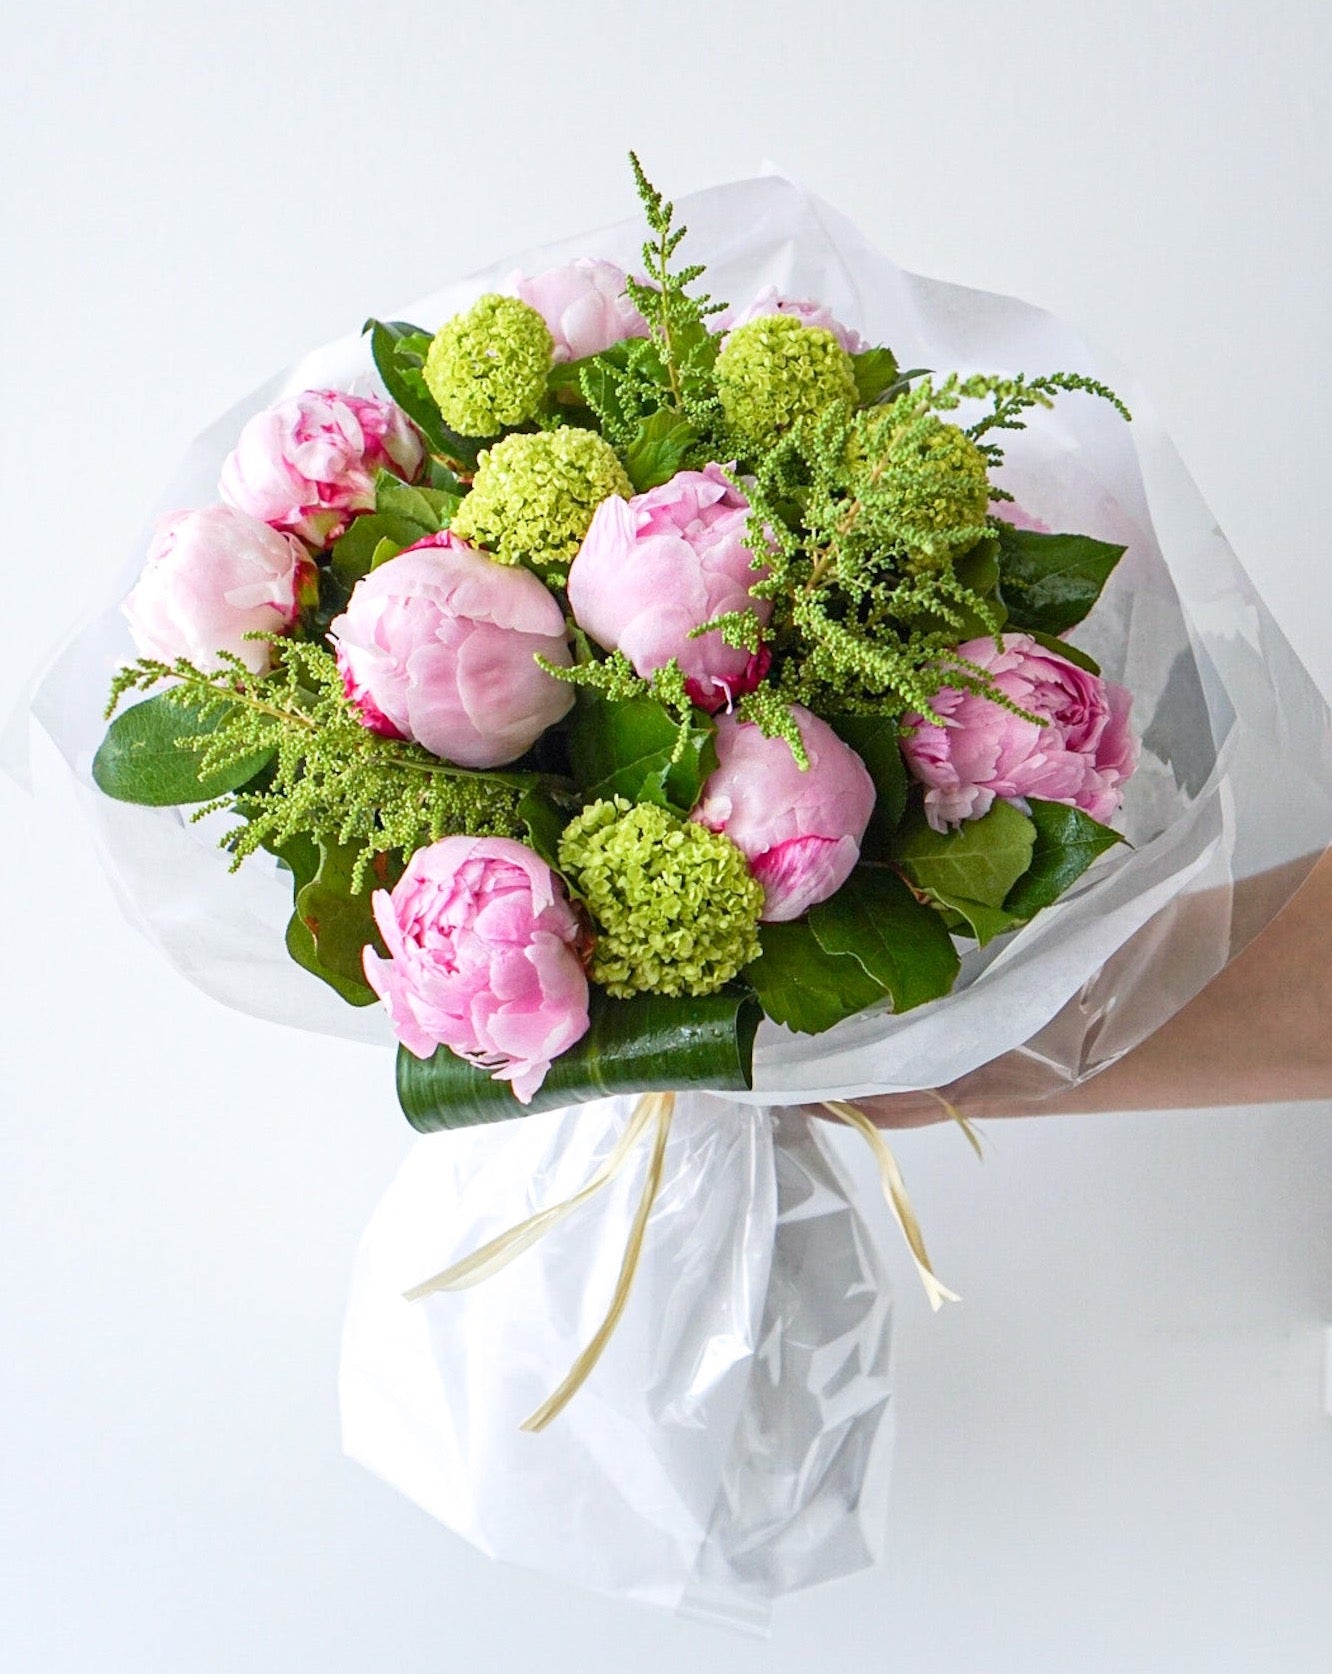 PEONIES are in season now and they are beautiful! Everyone loves the lush, cloud-like appearance of fresh cut peonies.  This simple bouquet of these lovely blooms is perfect gift for a friend or yourself.  We offer them in two styles:  Hand-tied bouquet that is ready to be pop into a vase at home Already designed in a fish bowl 